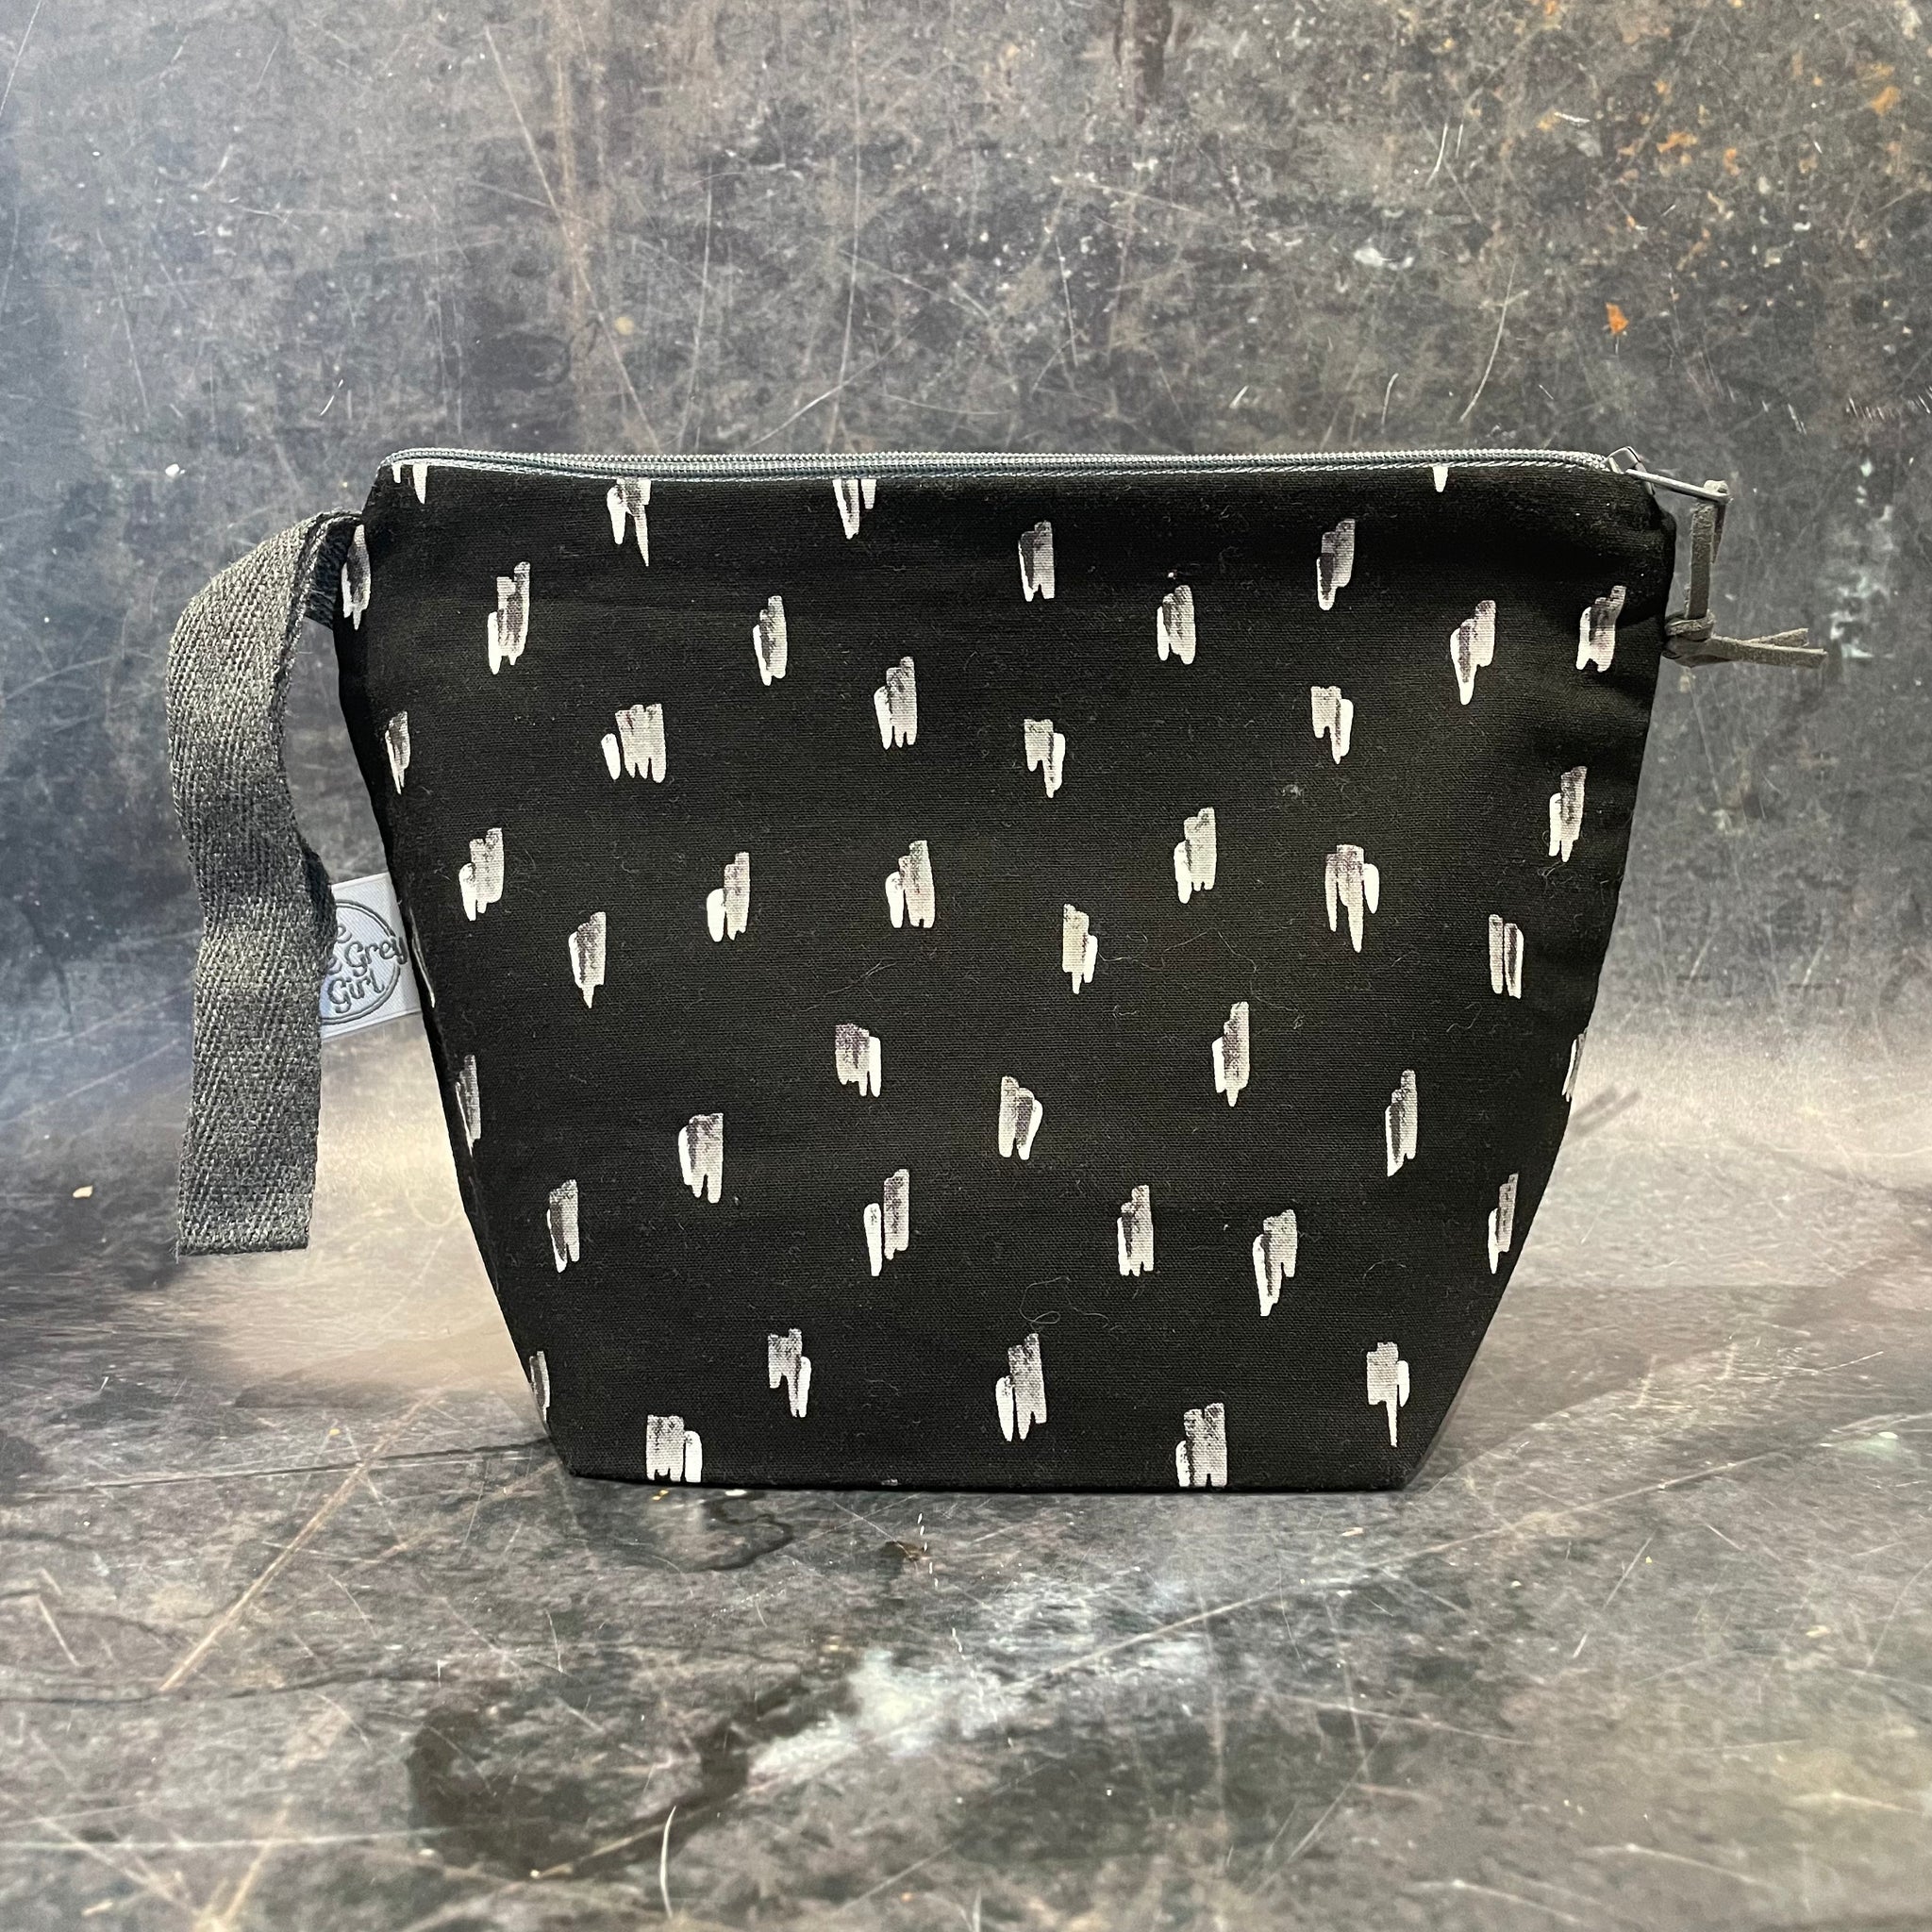 Small Project Bags - Discontinued Size